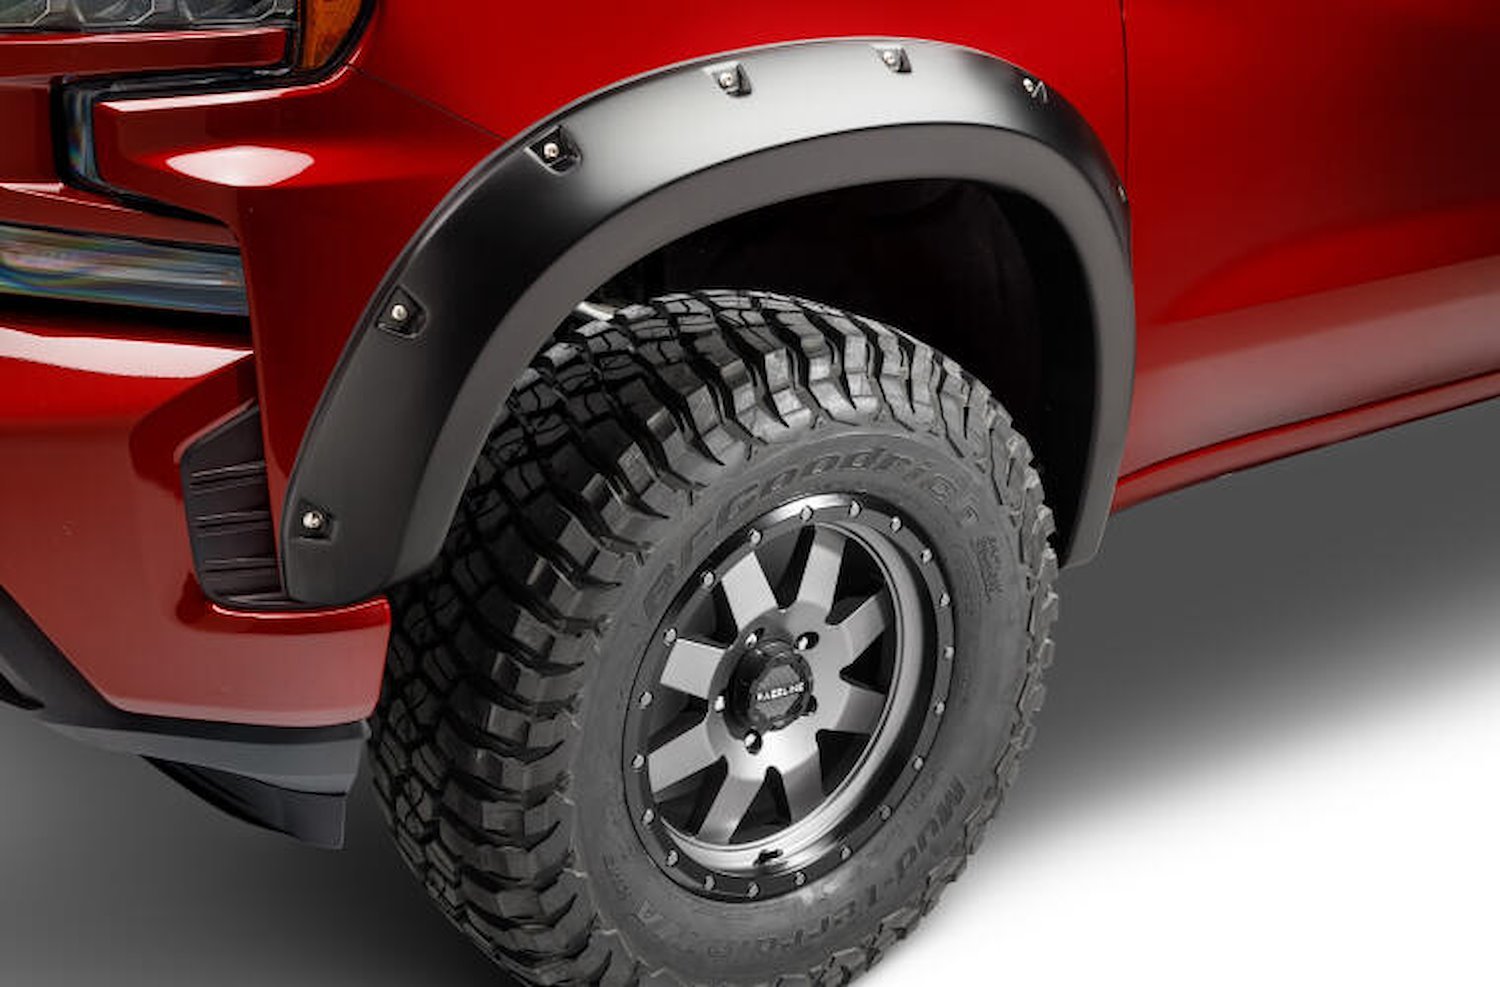 BWR40173-02 Front Pocket-Style Fender Flares Fits Select Chevy Silverado 1500 Trucks